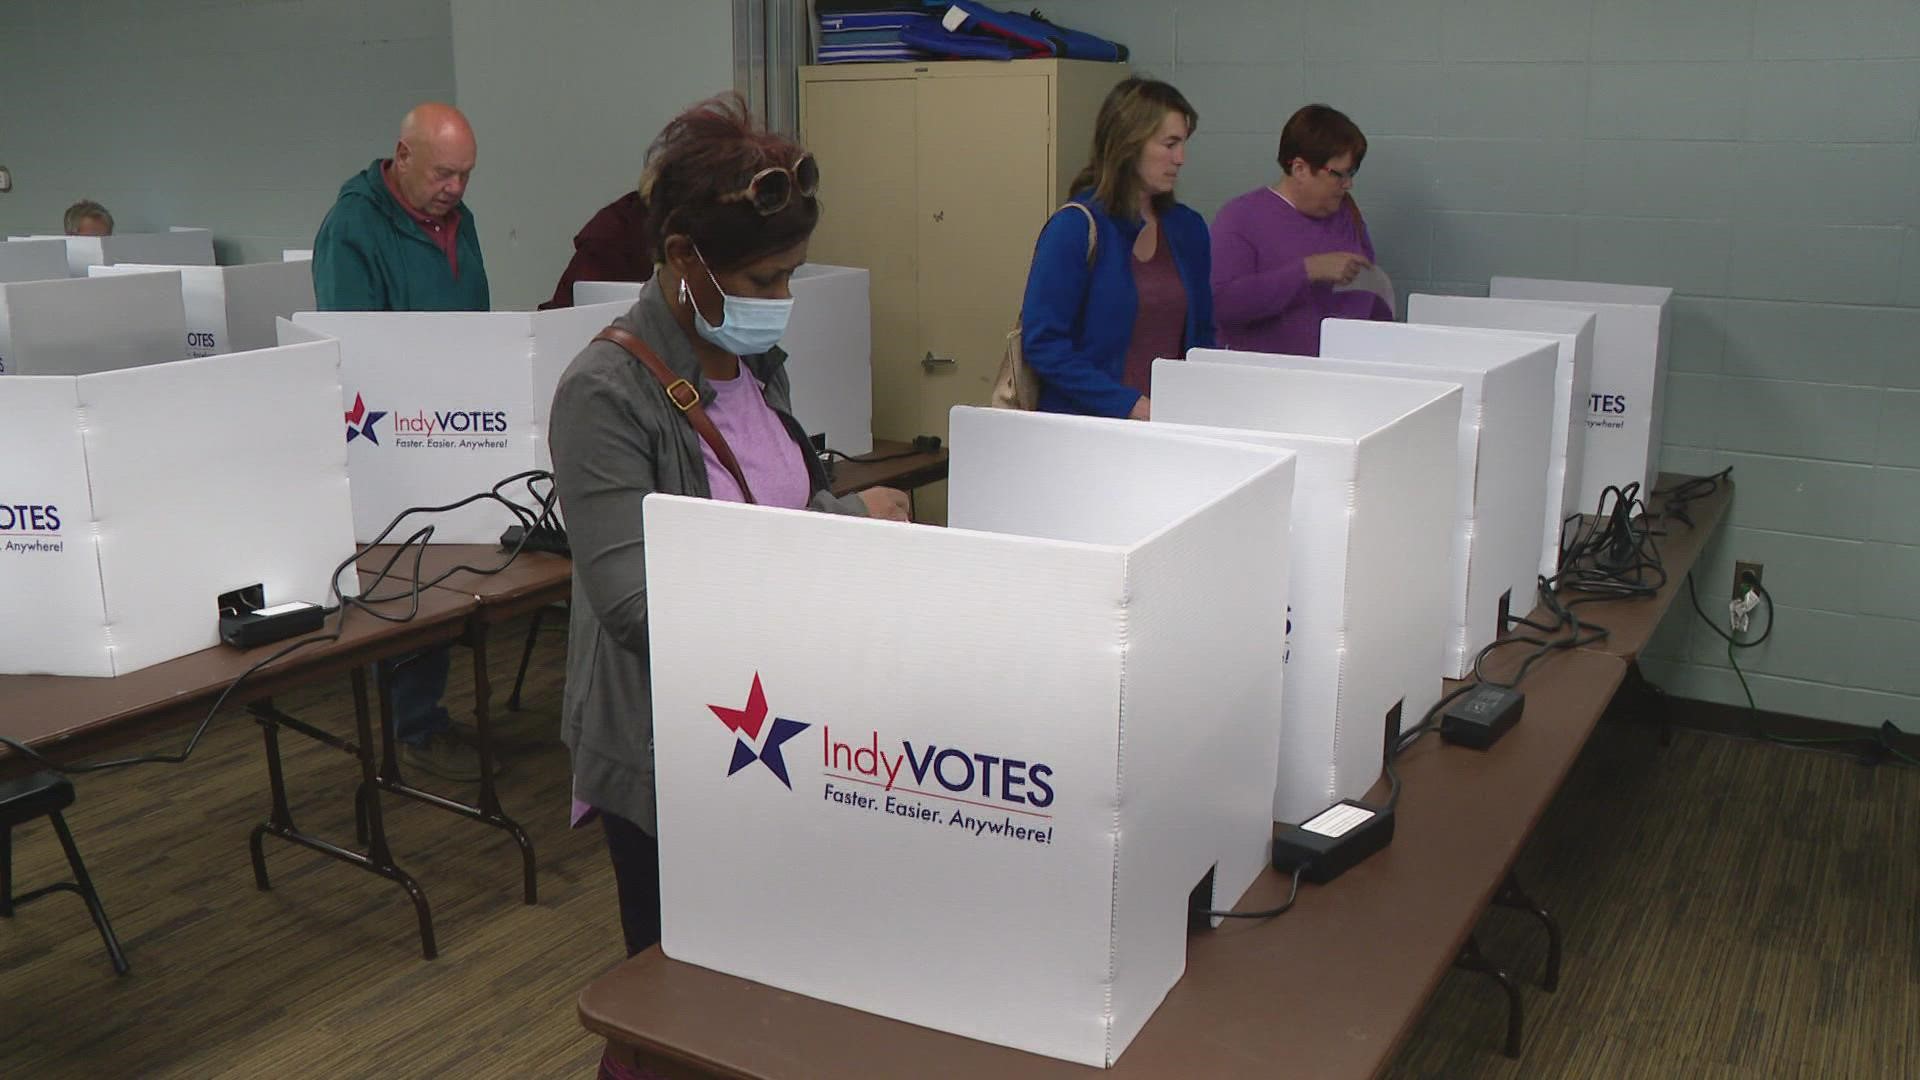 More than 20,000 Hoosiers here in Indianapolis have already cast their ballot ahead of Election Day.